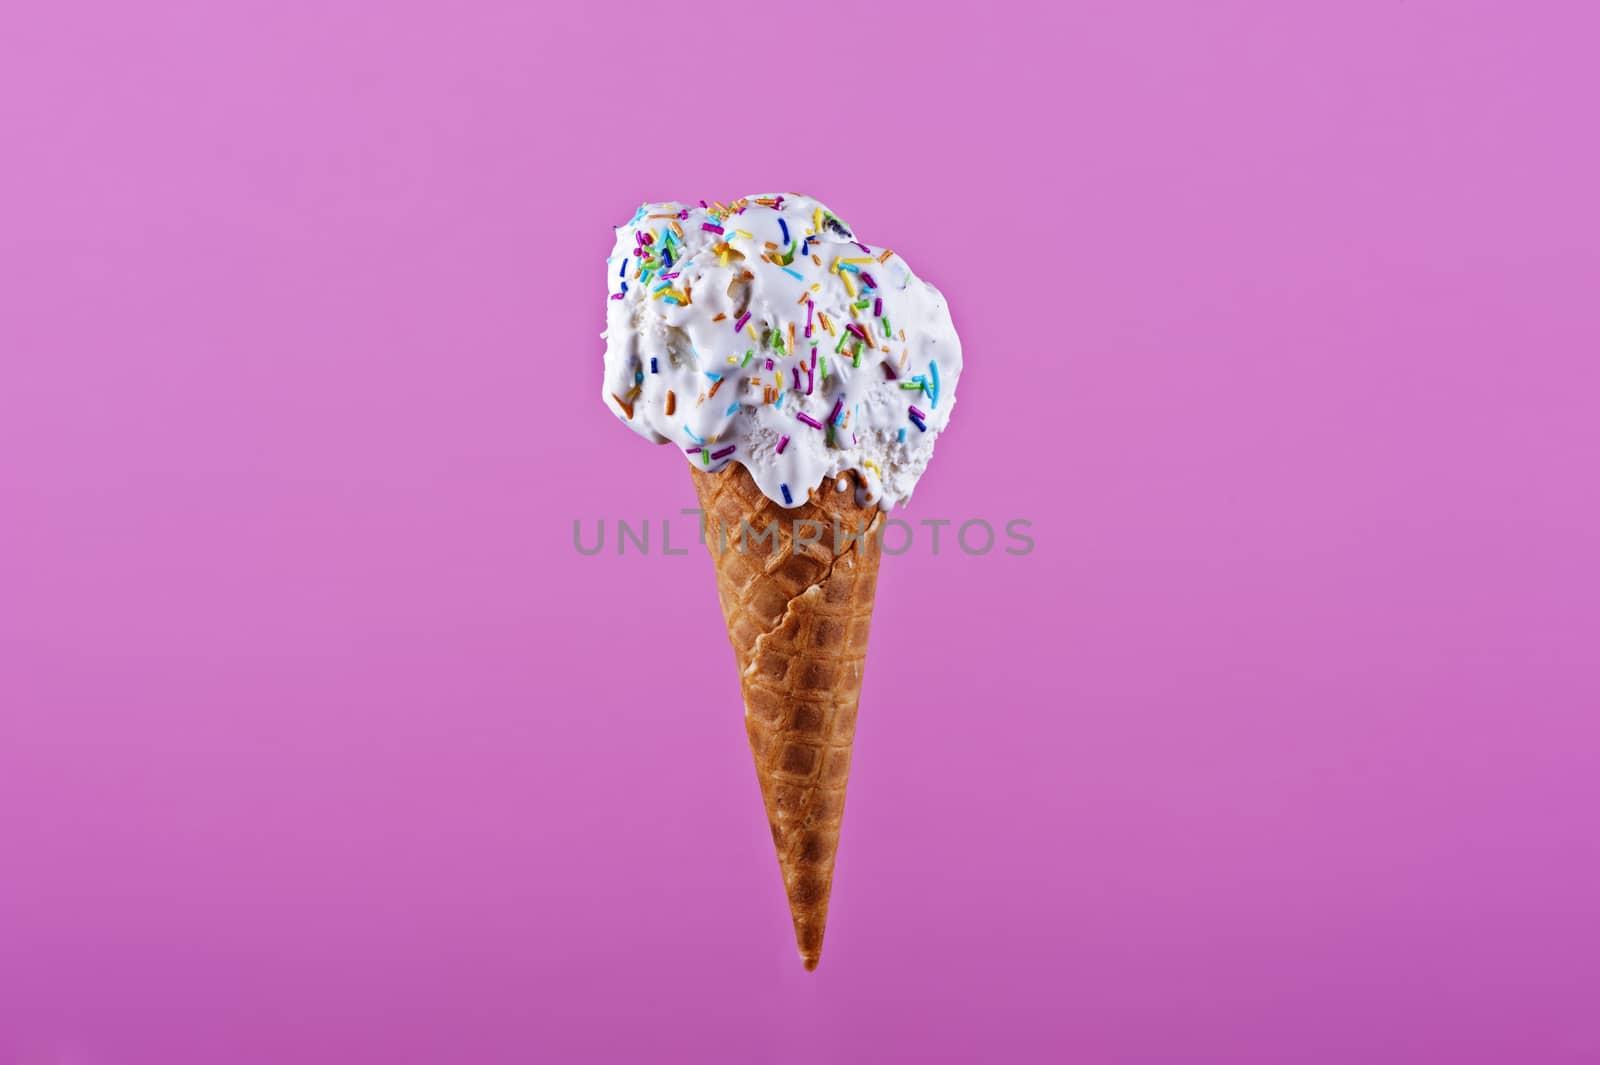 Ice cream in wafer cone on pink background by Michalowski